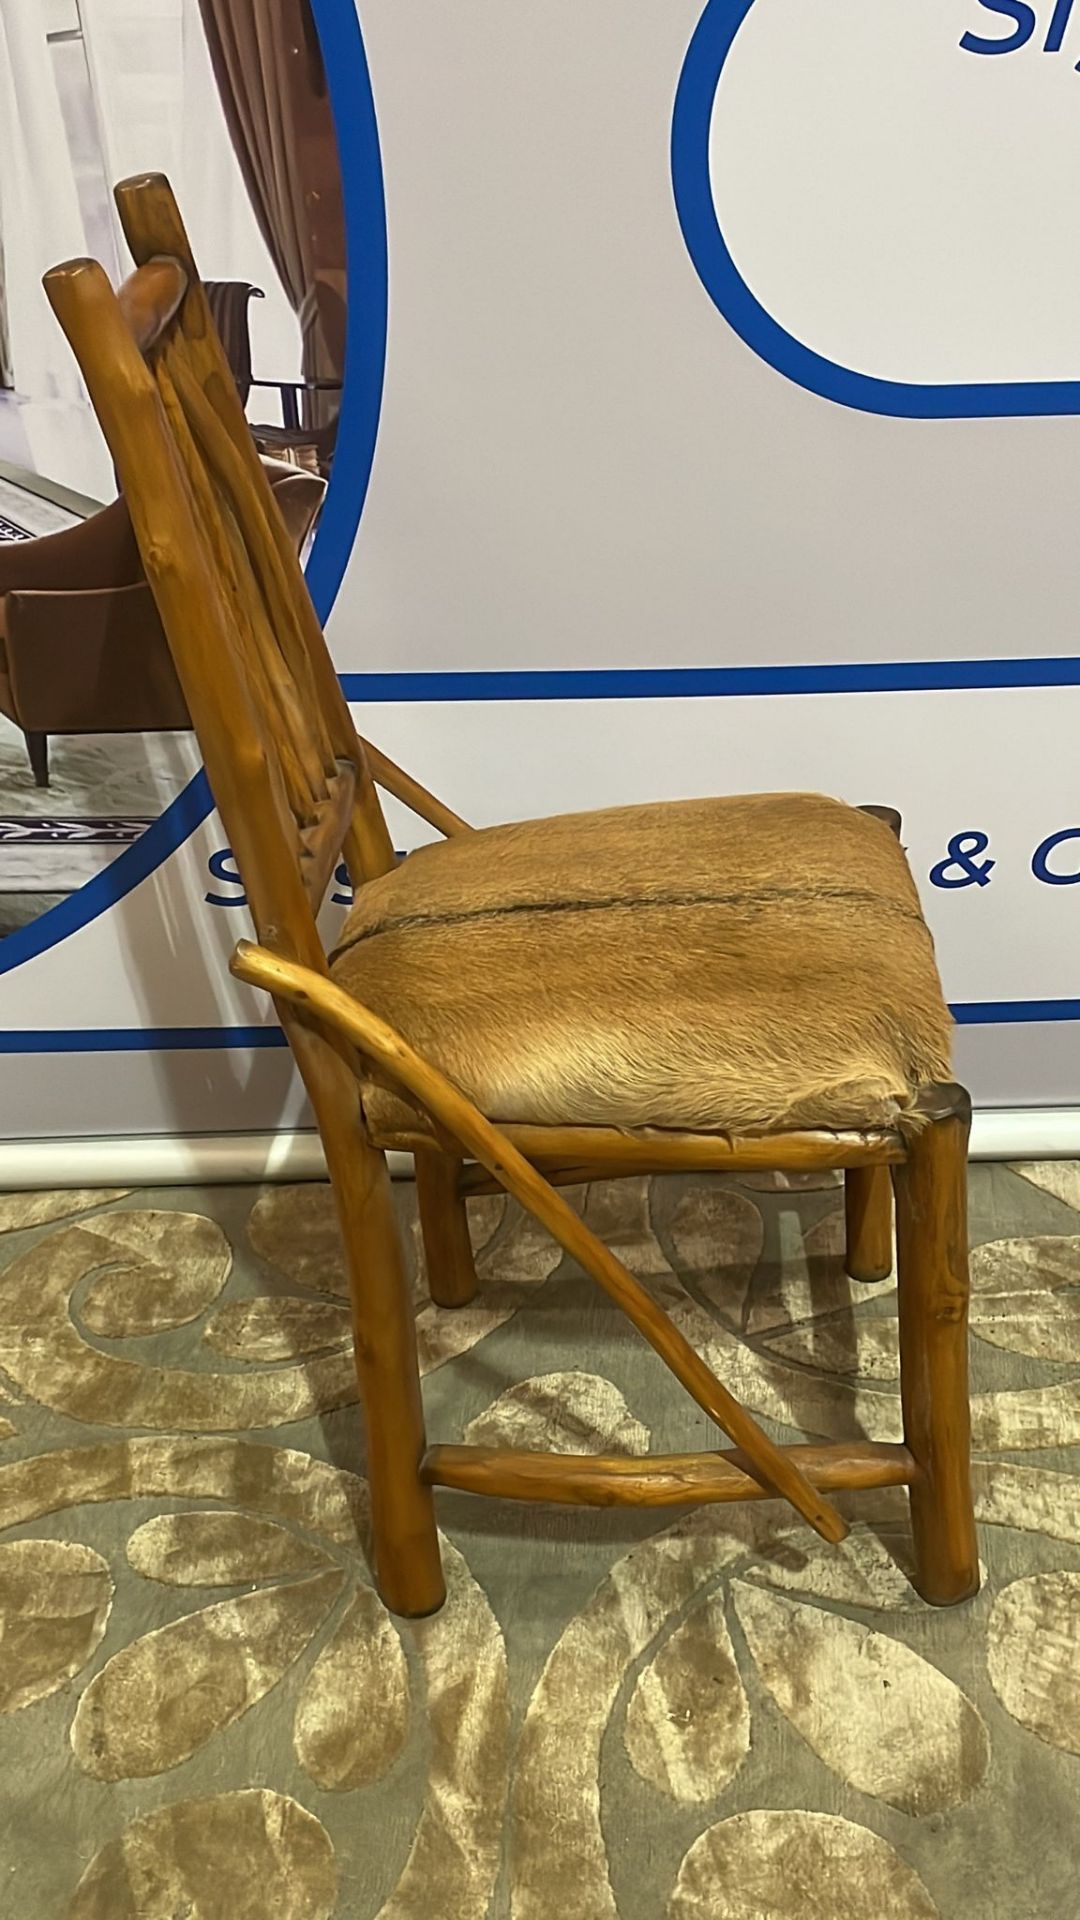 An Unusual Hand Carved Wooden Accent Chair With Hyde Seat Pad 46 x 46 x 105cm - Bild 2 aus 3